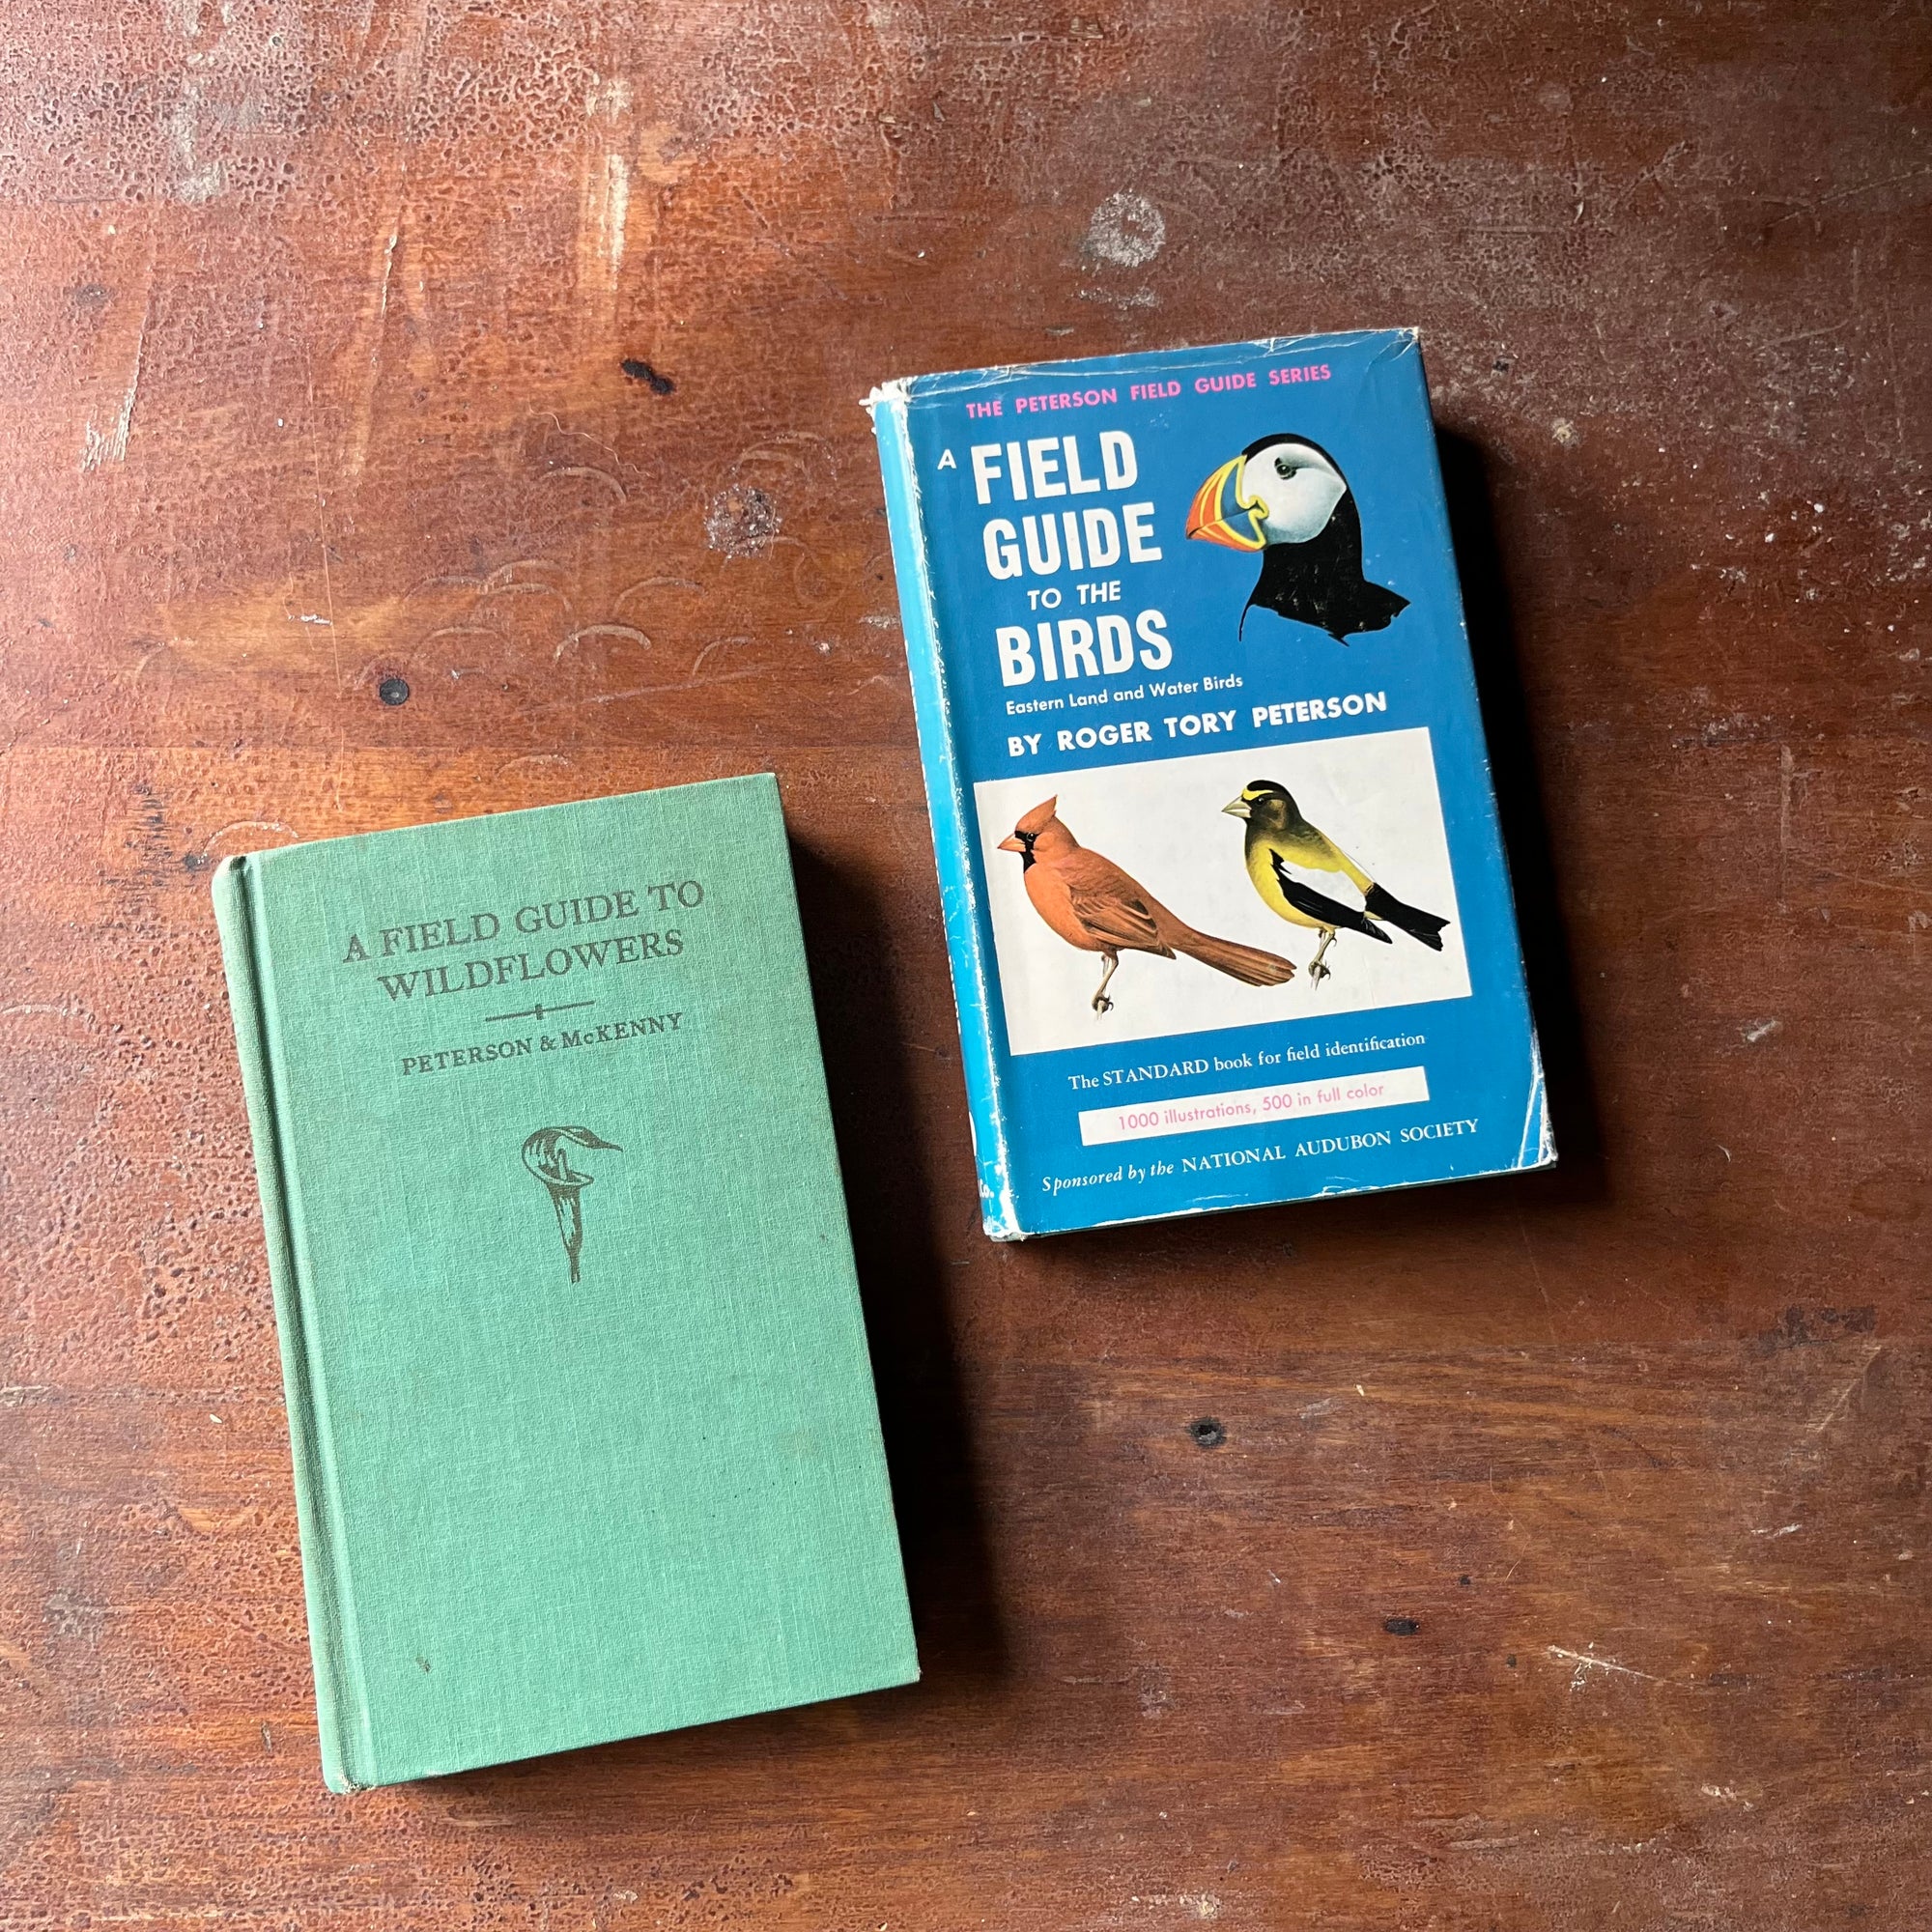 vintage nature guides - Pair of Peterson Field Guides-Field Guide to the Birds & Field Guide to Wildflowers - view of the front covers, one with its original dust jacket